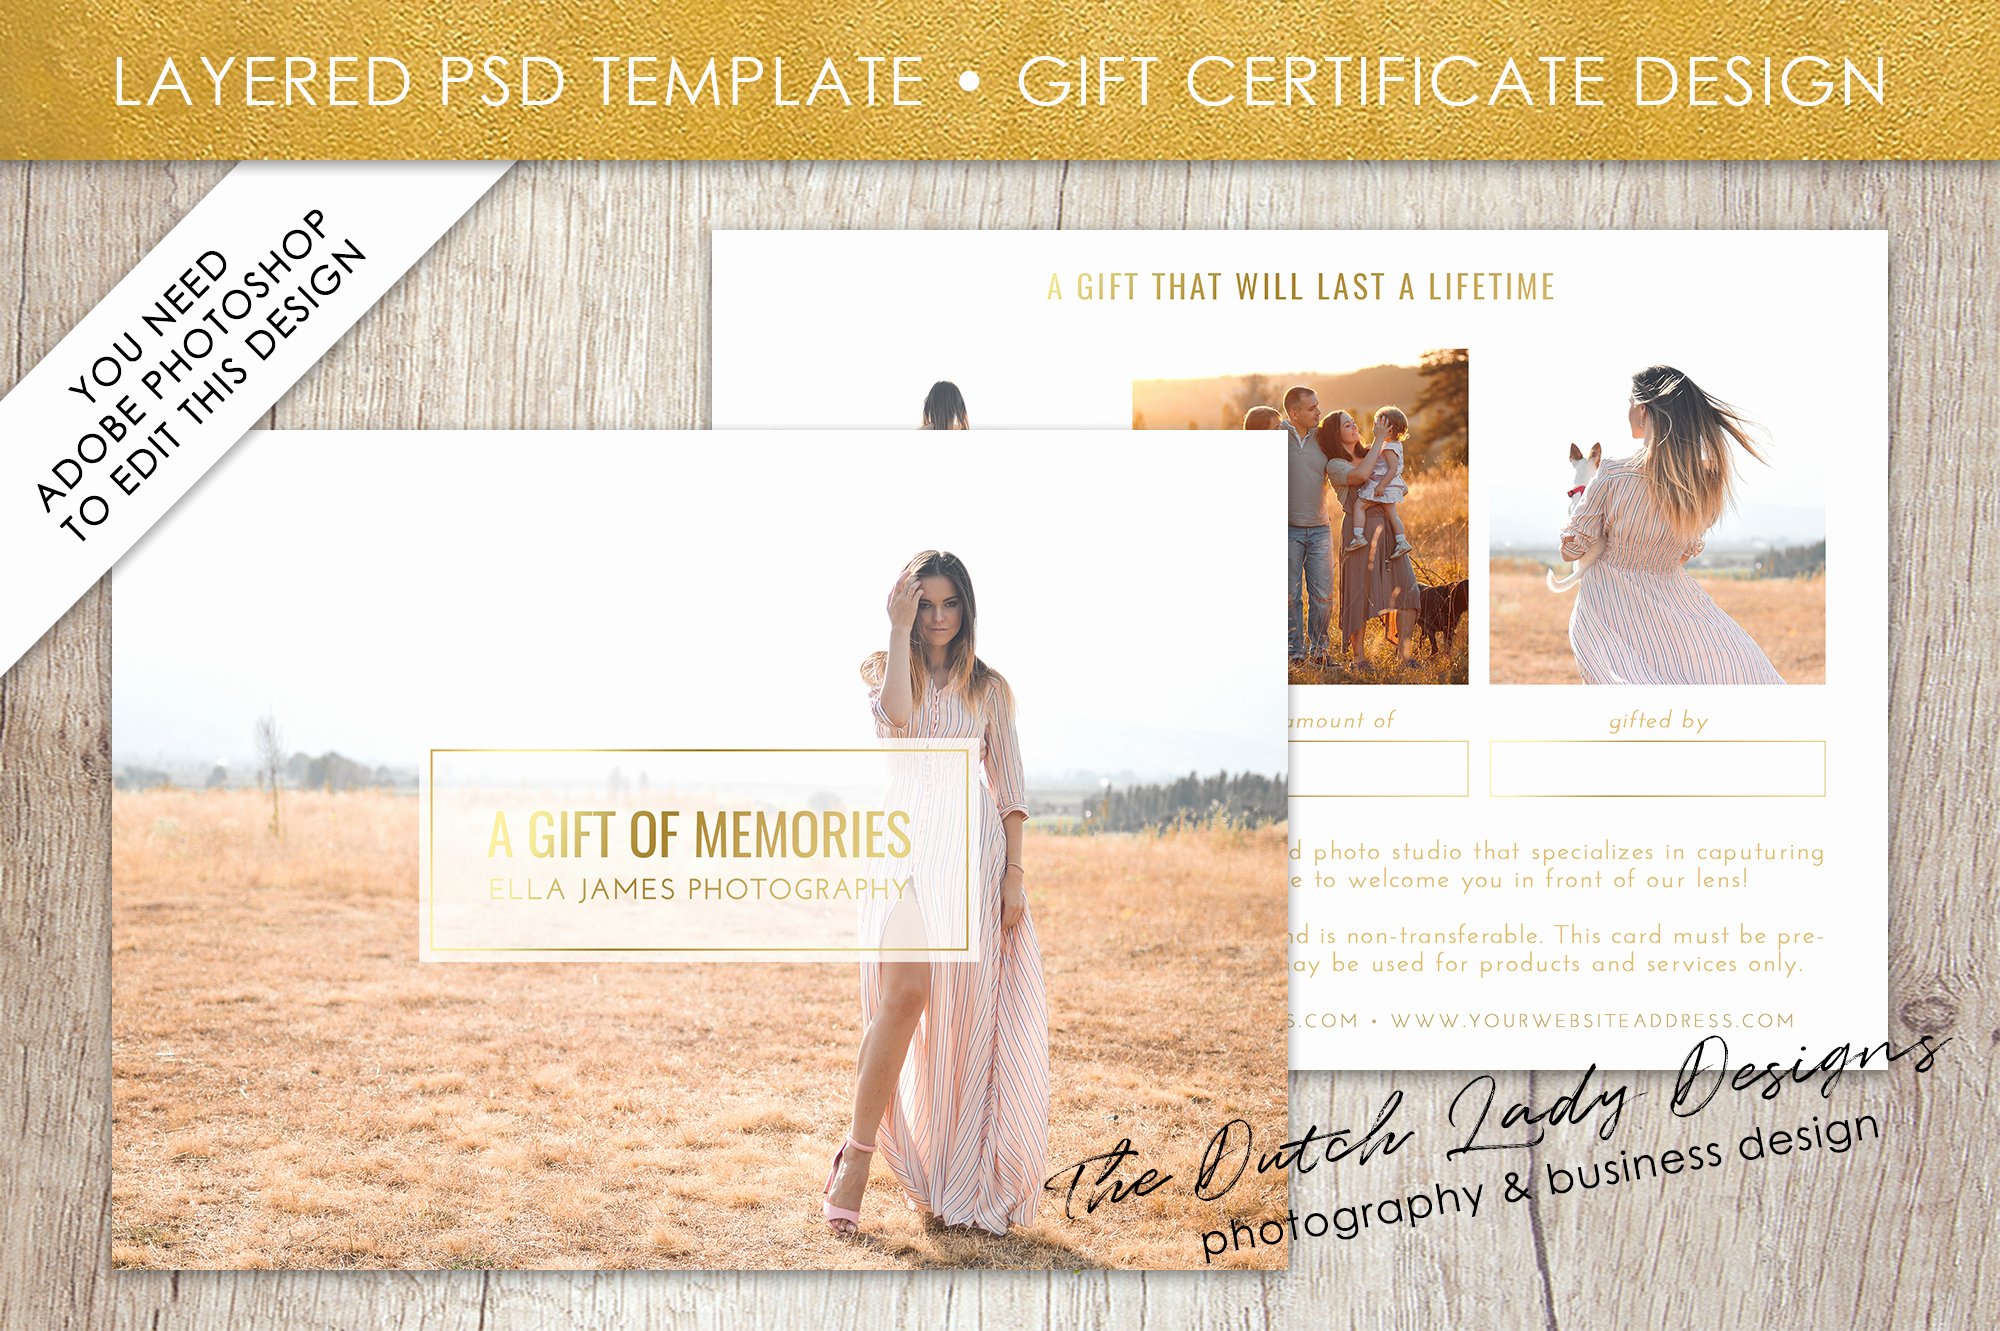 Photography Gift Certificate Wording Best Of Graphy Gift Certificate Template Gift Card Layered Psd Files Design 31